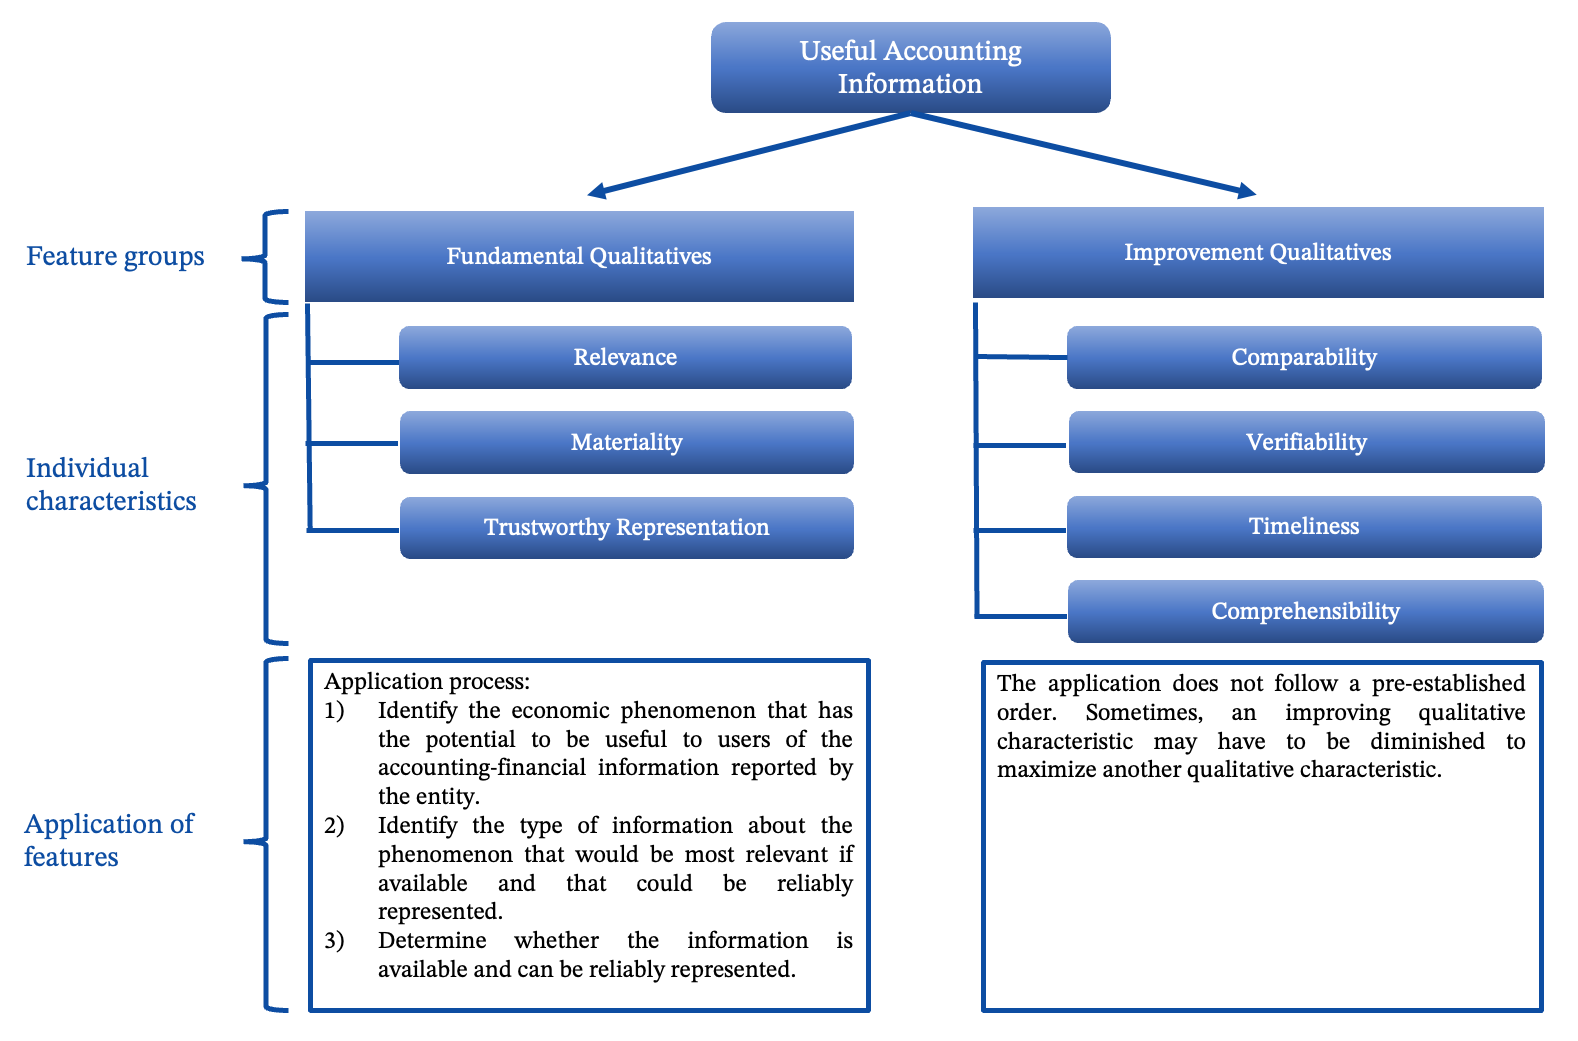 Characteristics of Useful Accounting Information